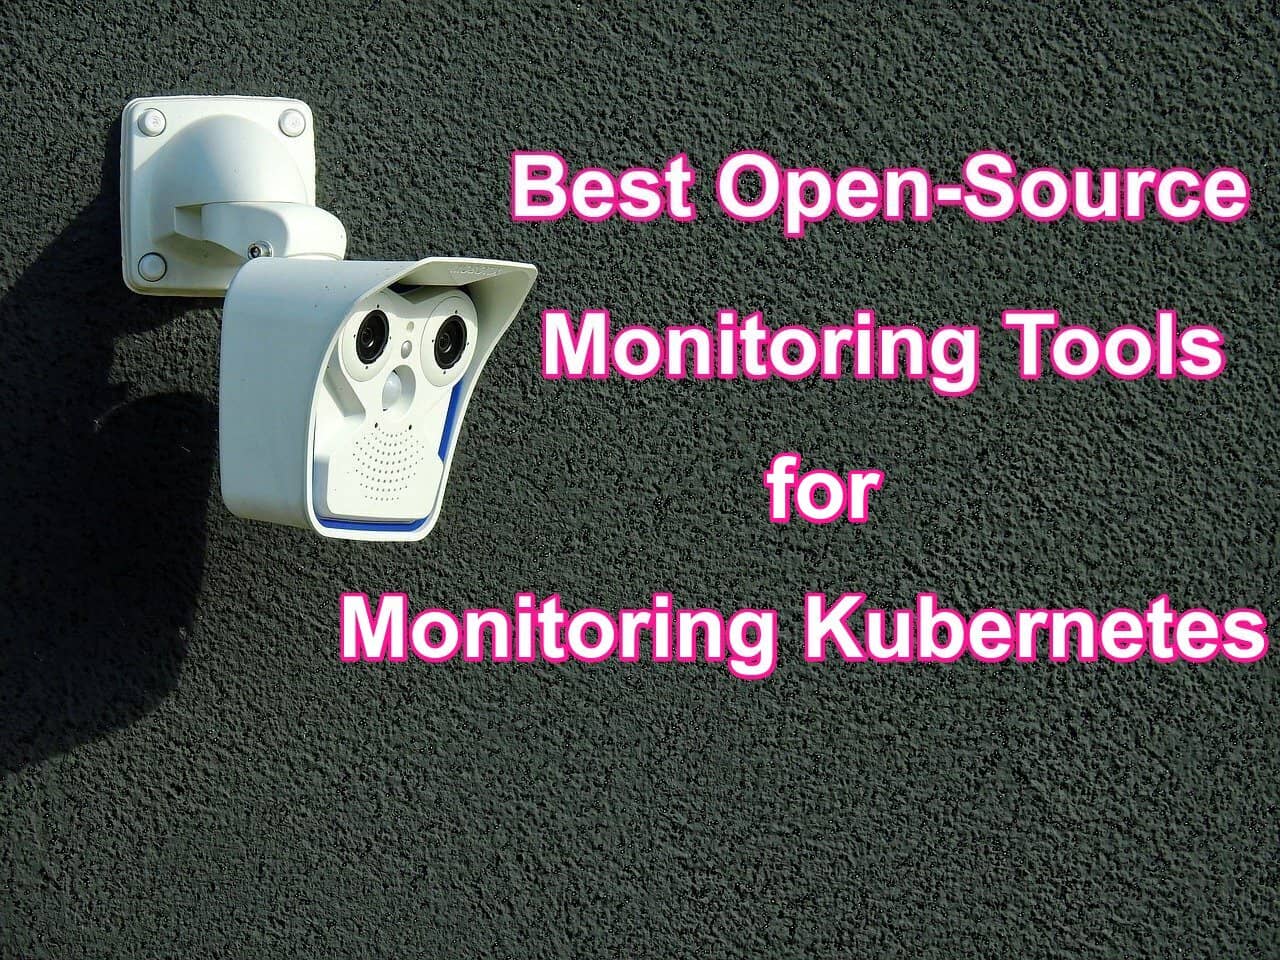 Best Open Source Monitoring Options in 2021 for your Kubernetes Cluster